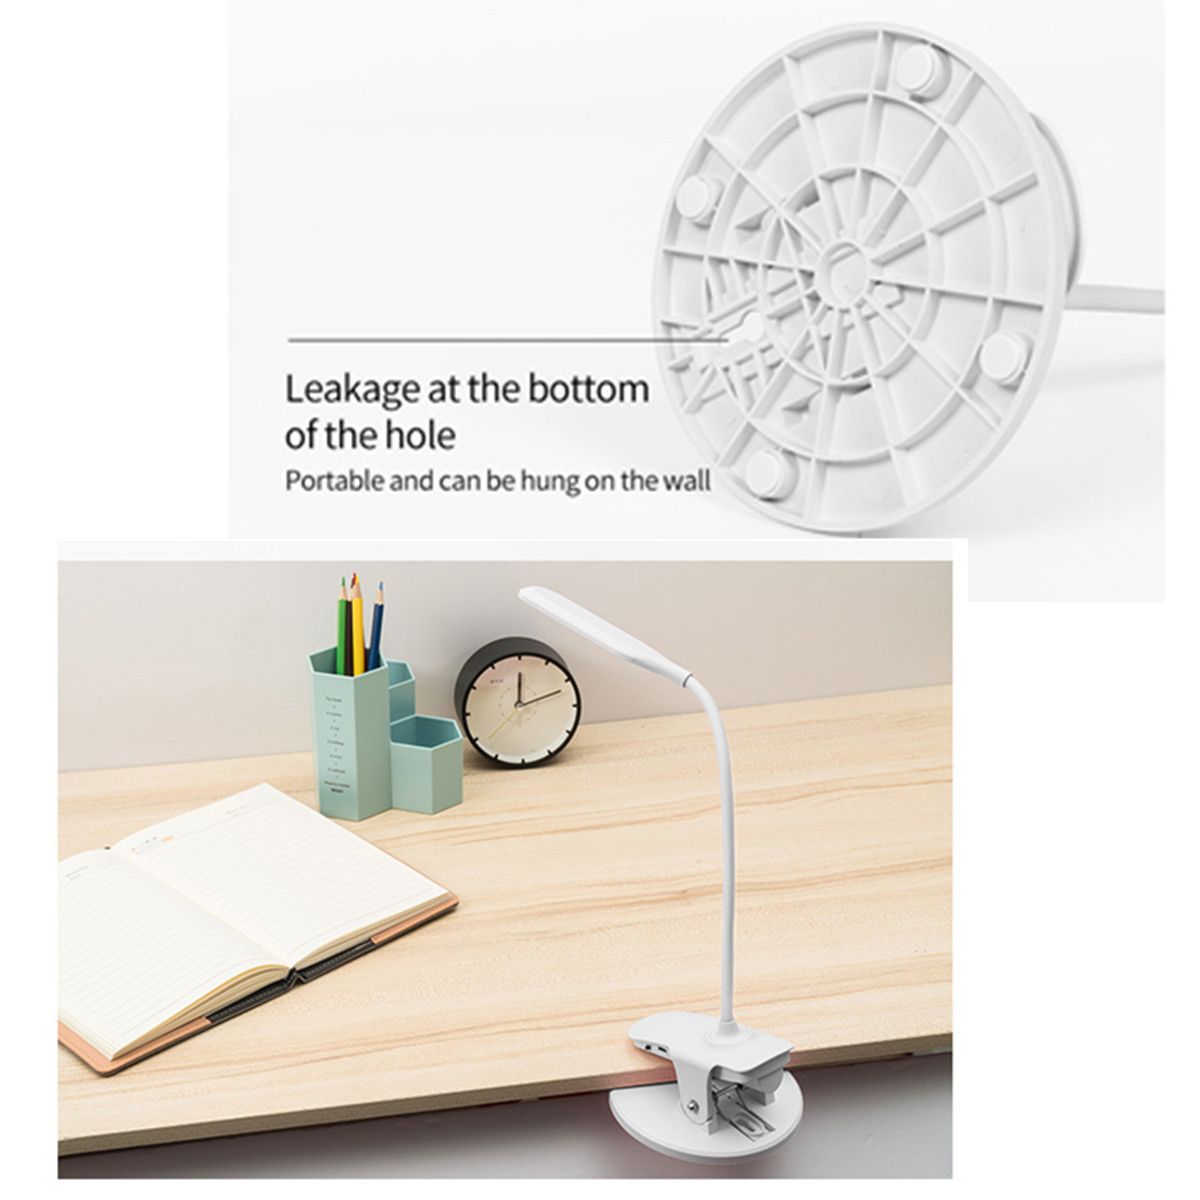 Bakeey-USB-Rechargeable-LED-Desk-Lights-Clip-Flexible-Eye-Protection-Reading-Touch-Lamp-USB-Charger-1613293